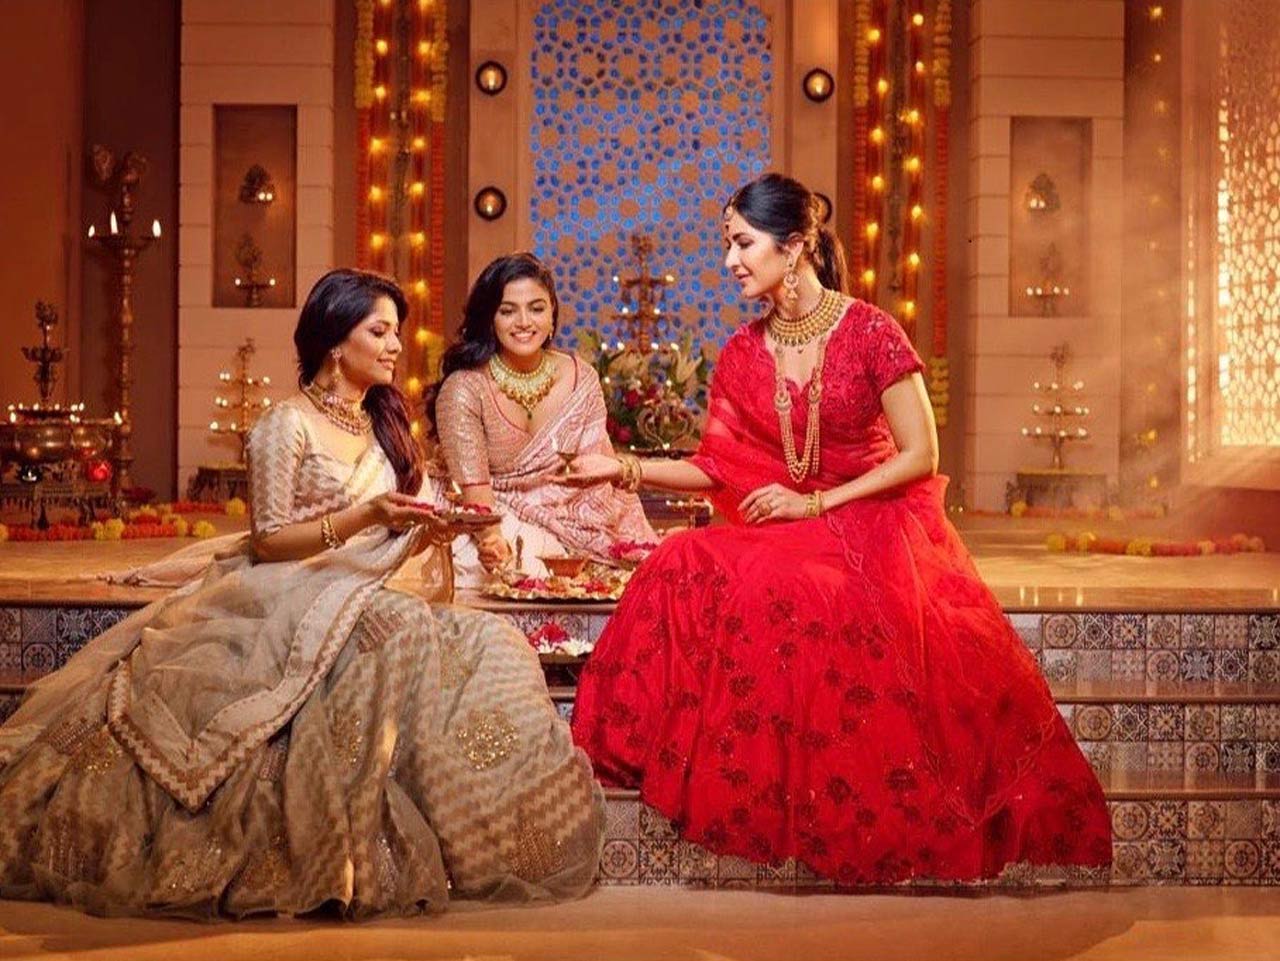 As the actress wished everyone on the occasion of Diwali, she posted a picture of herself wearing a red lehenga complemented with gold jewellery. Will she be a typical Indian bride or will Katrina go over the top for her real wedding? Only time will tell.